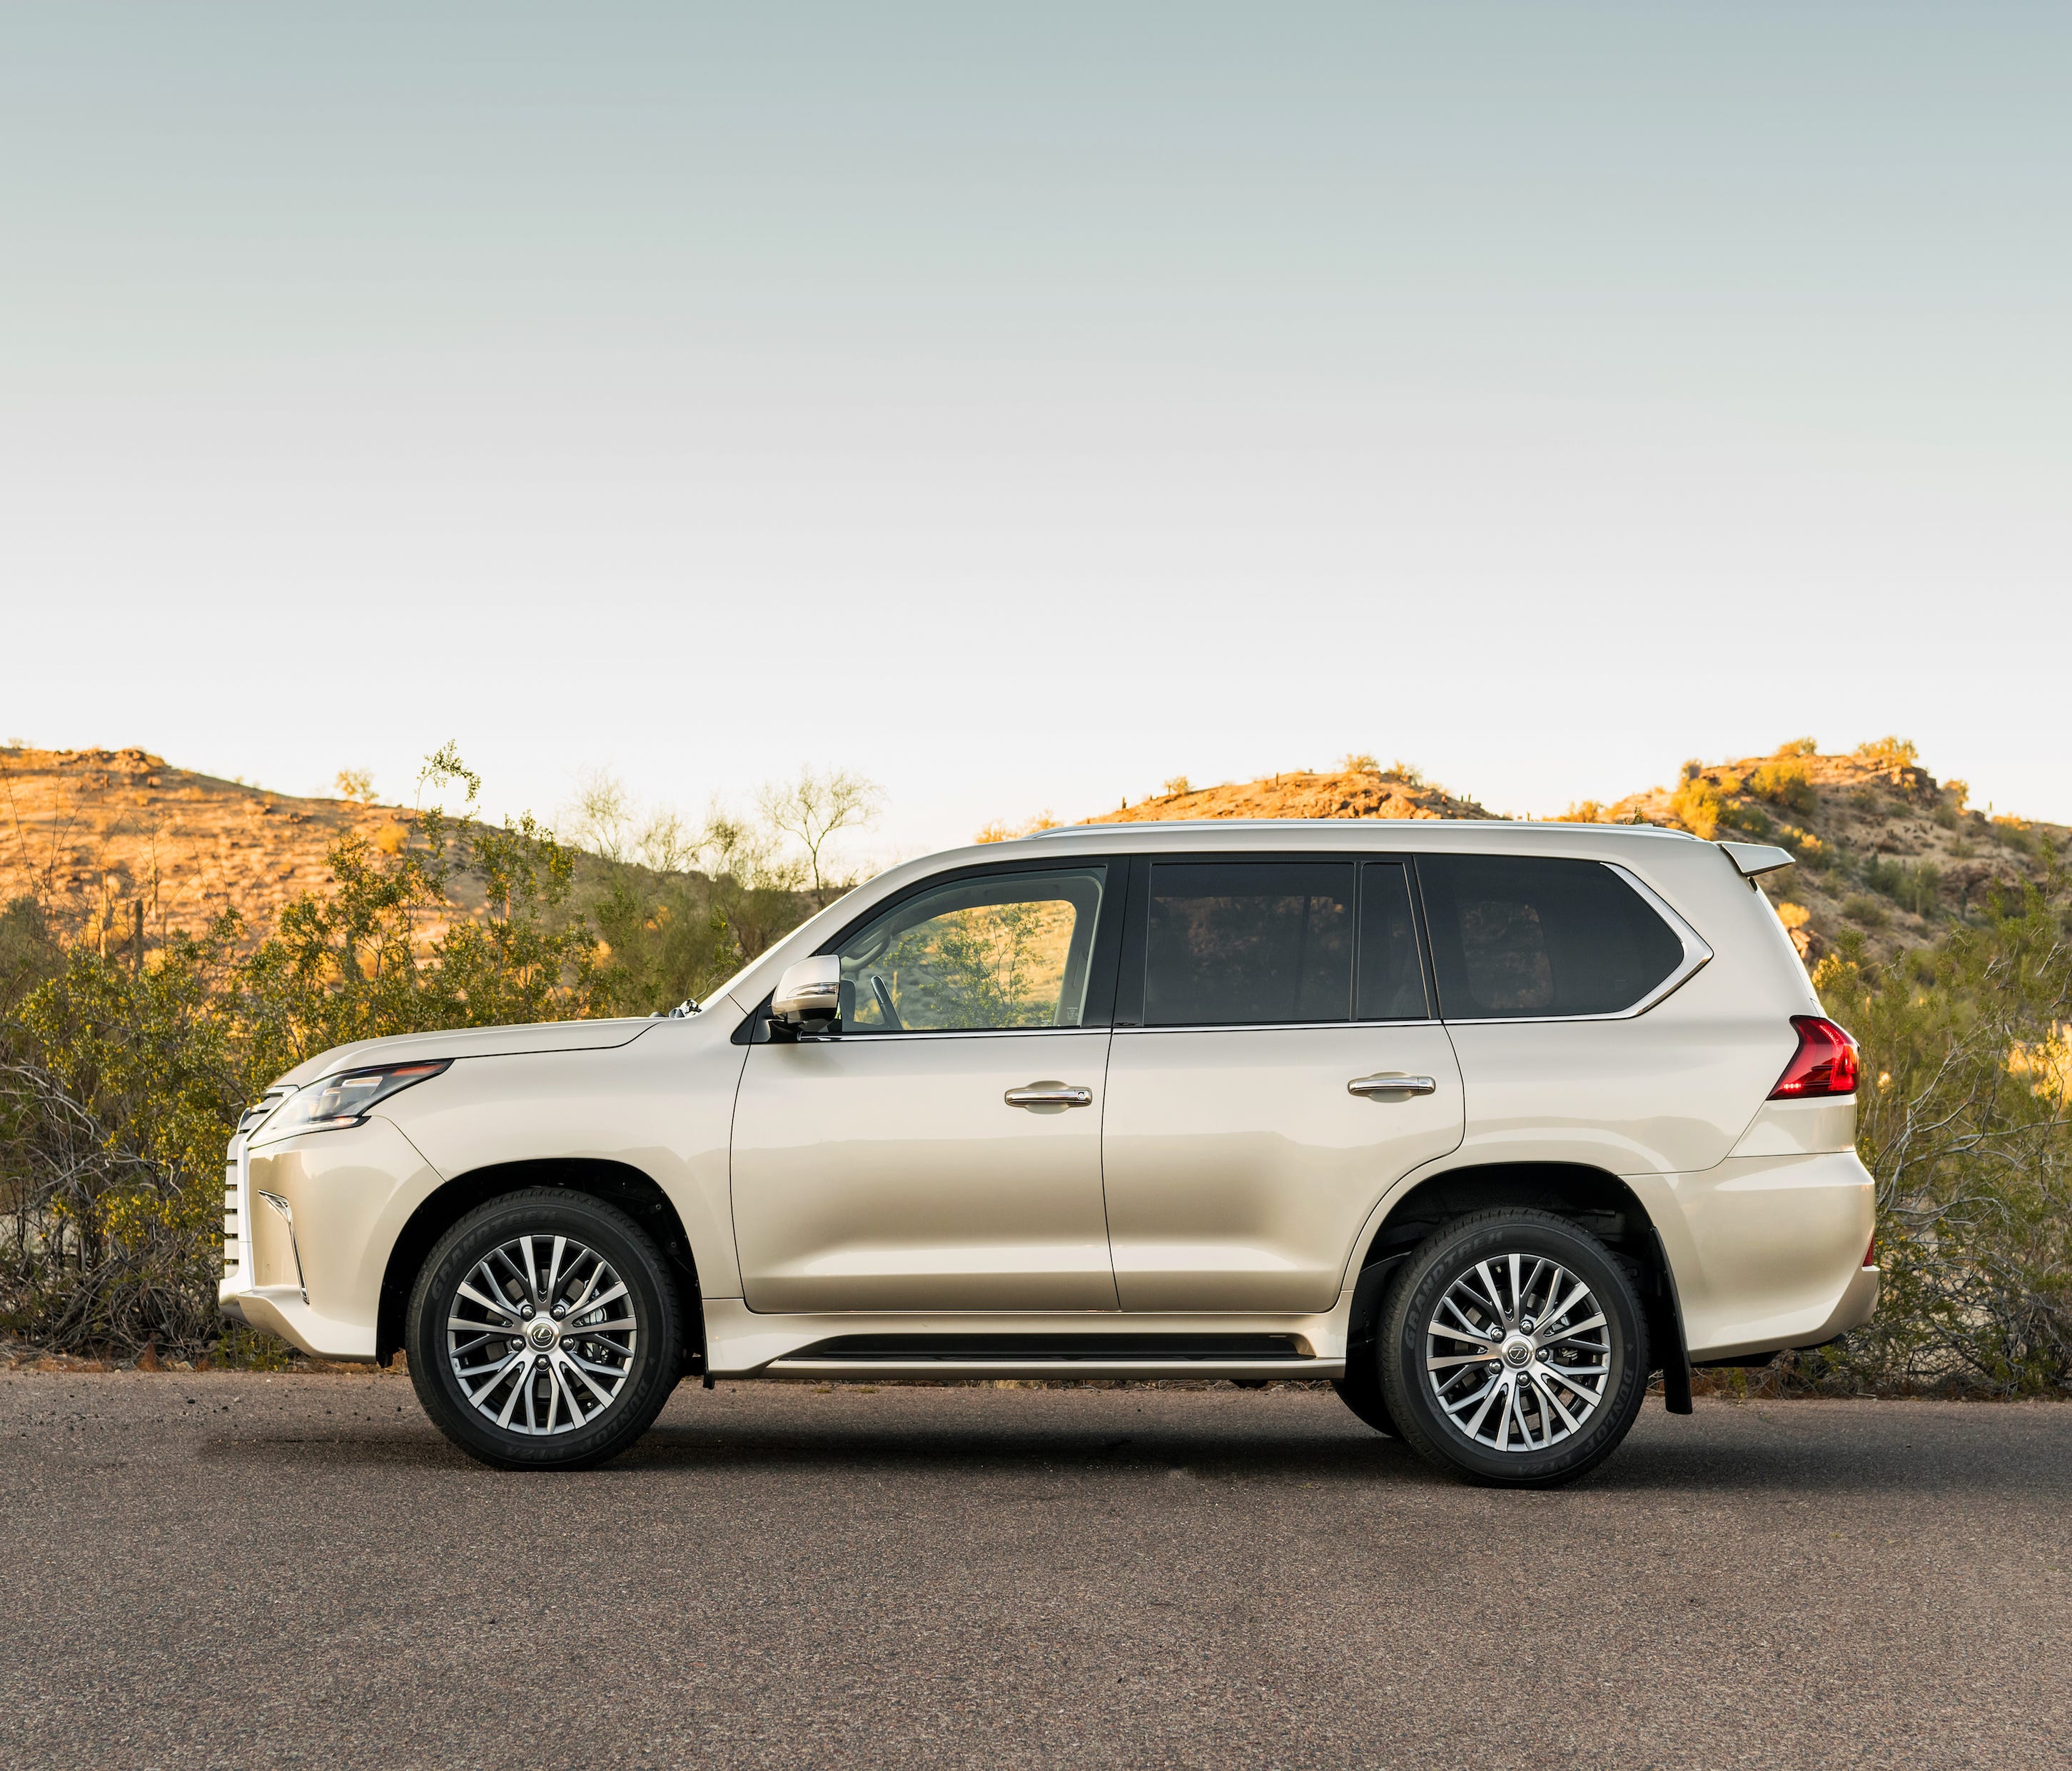 From the side, the Lexus LX 570 shows its stature